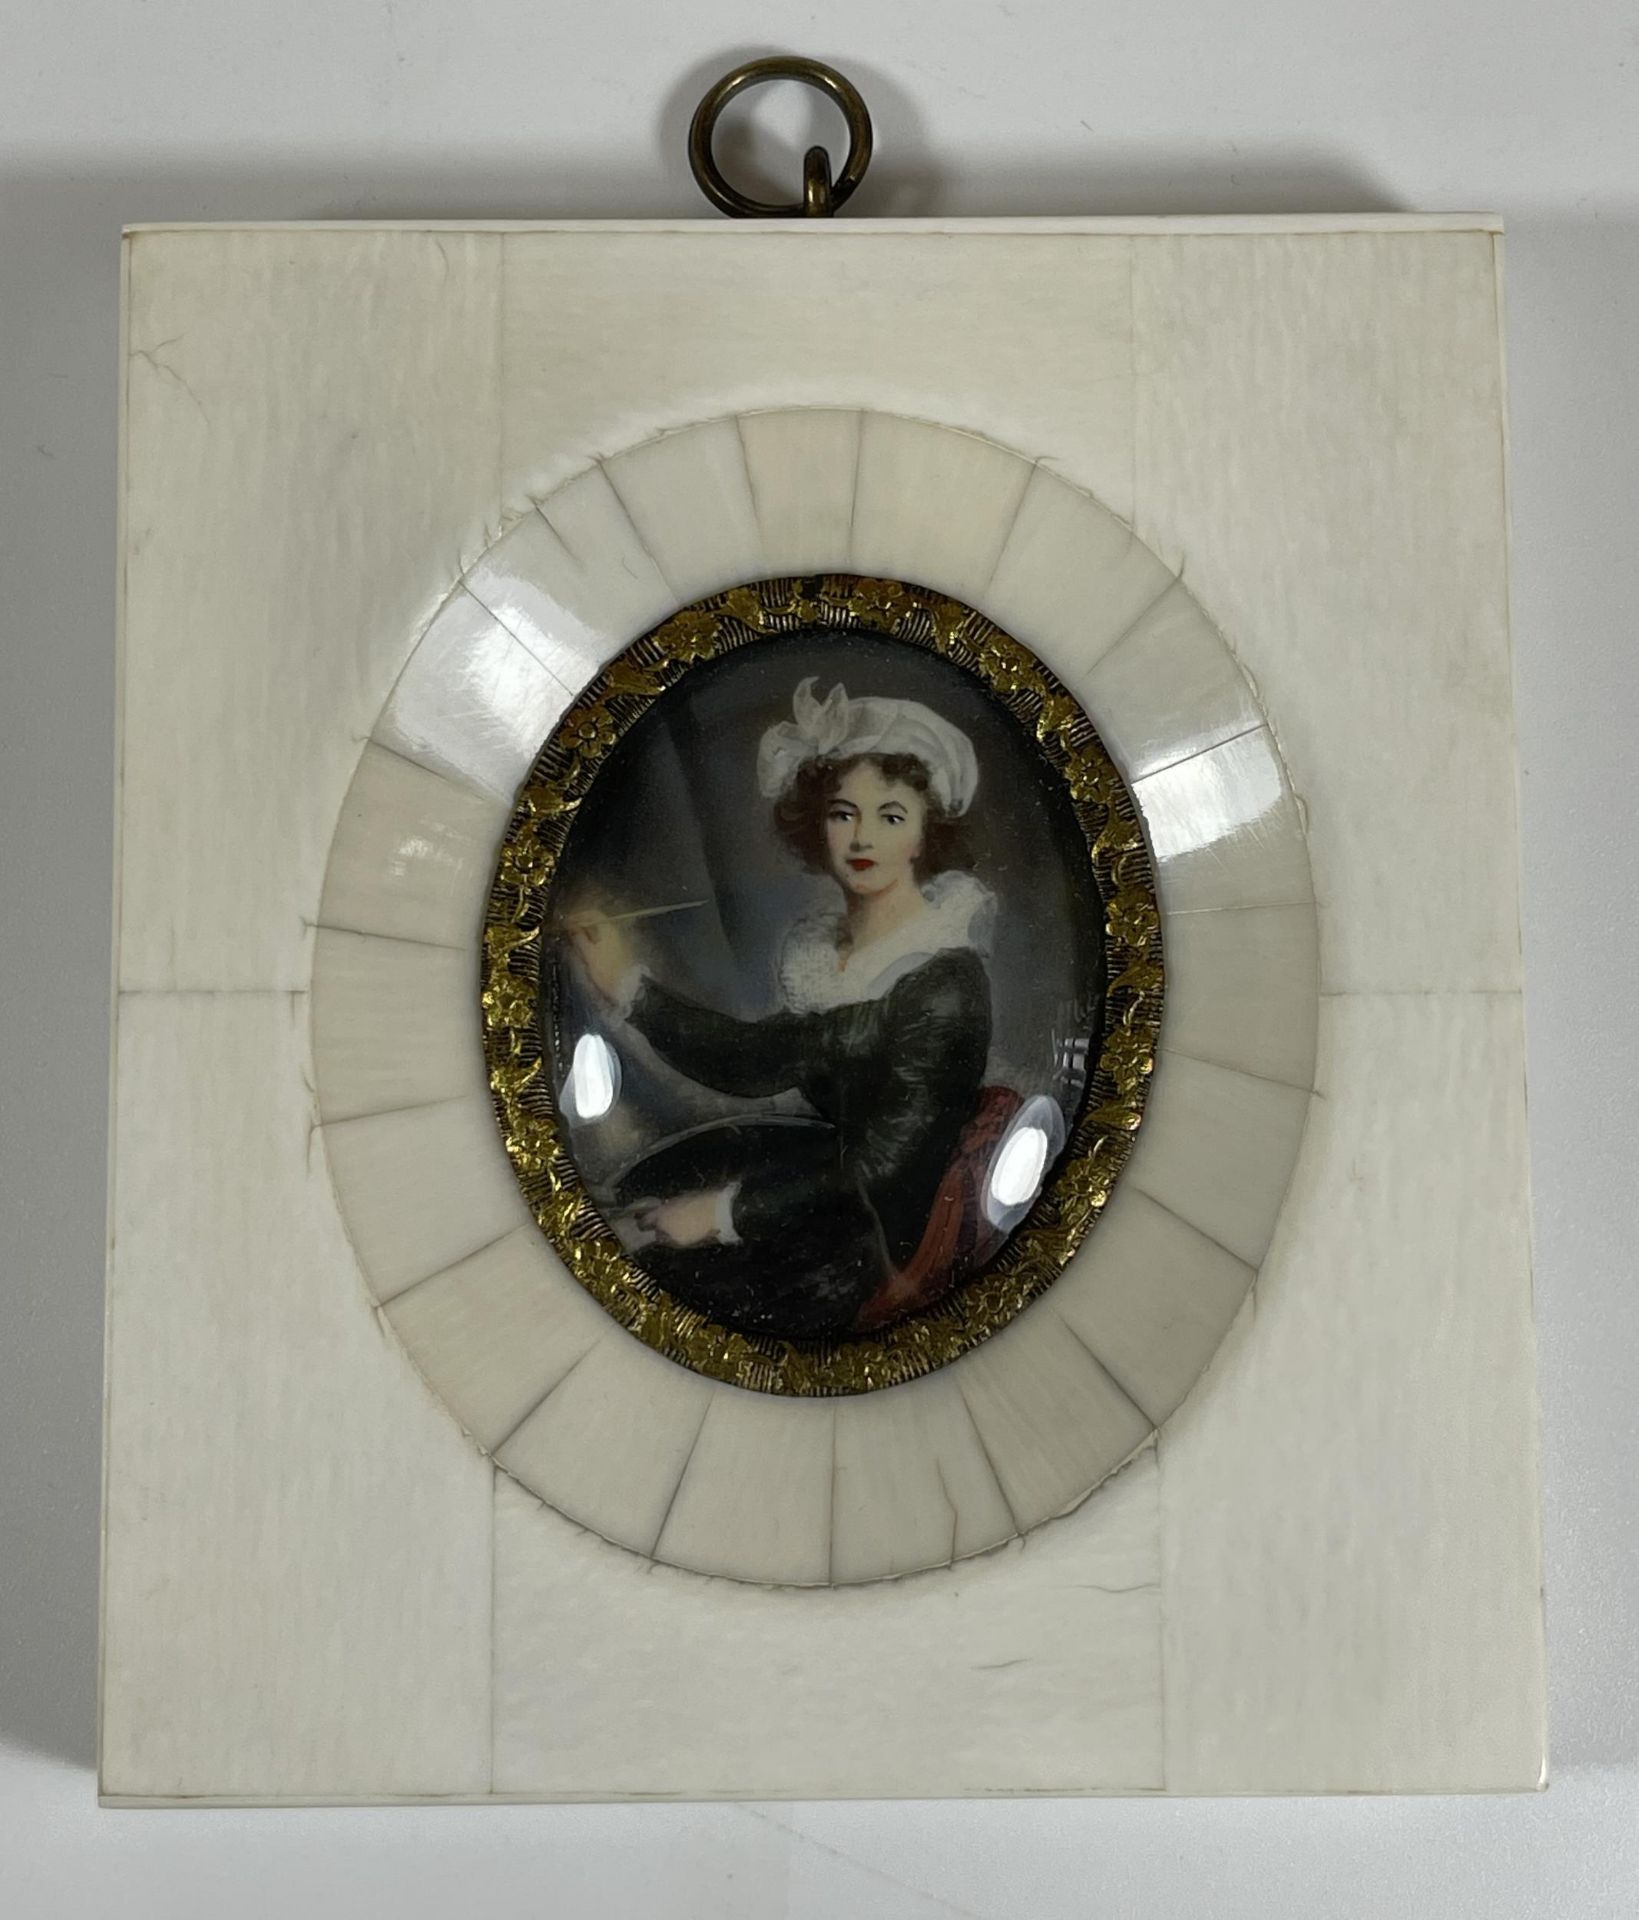 AN ANTIQUE PORTRAIT MINIATURE OF A LADY PAINTING WITH GILT BORDER